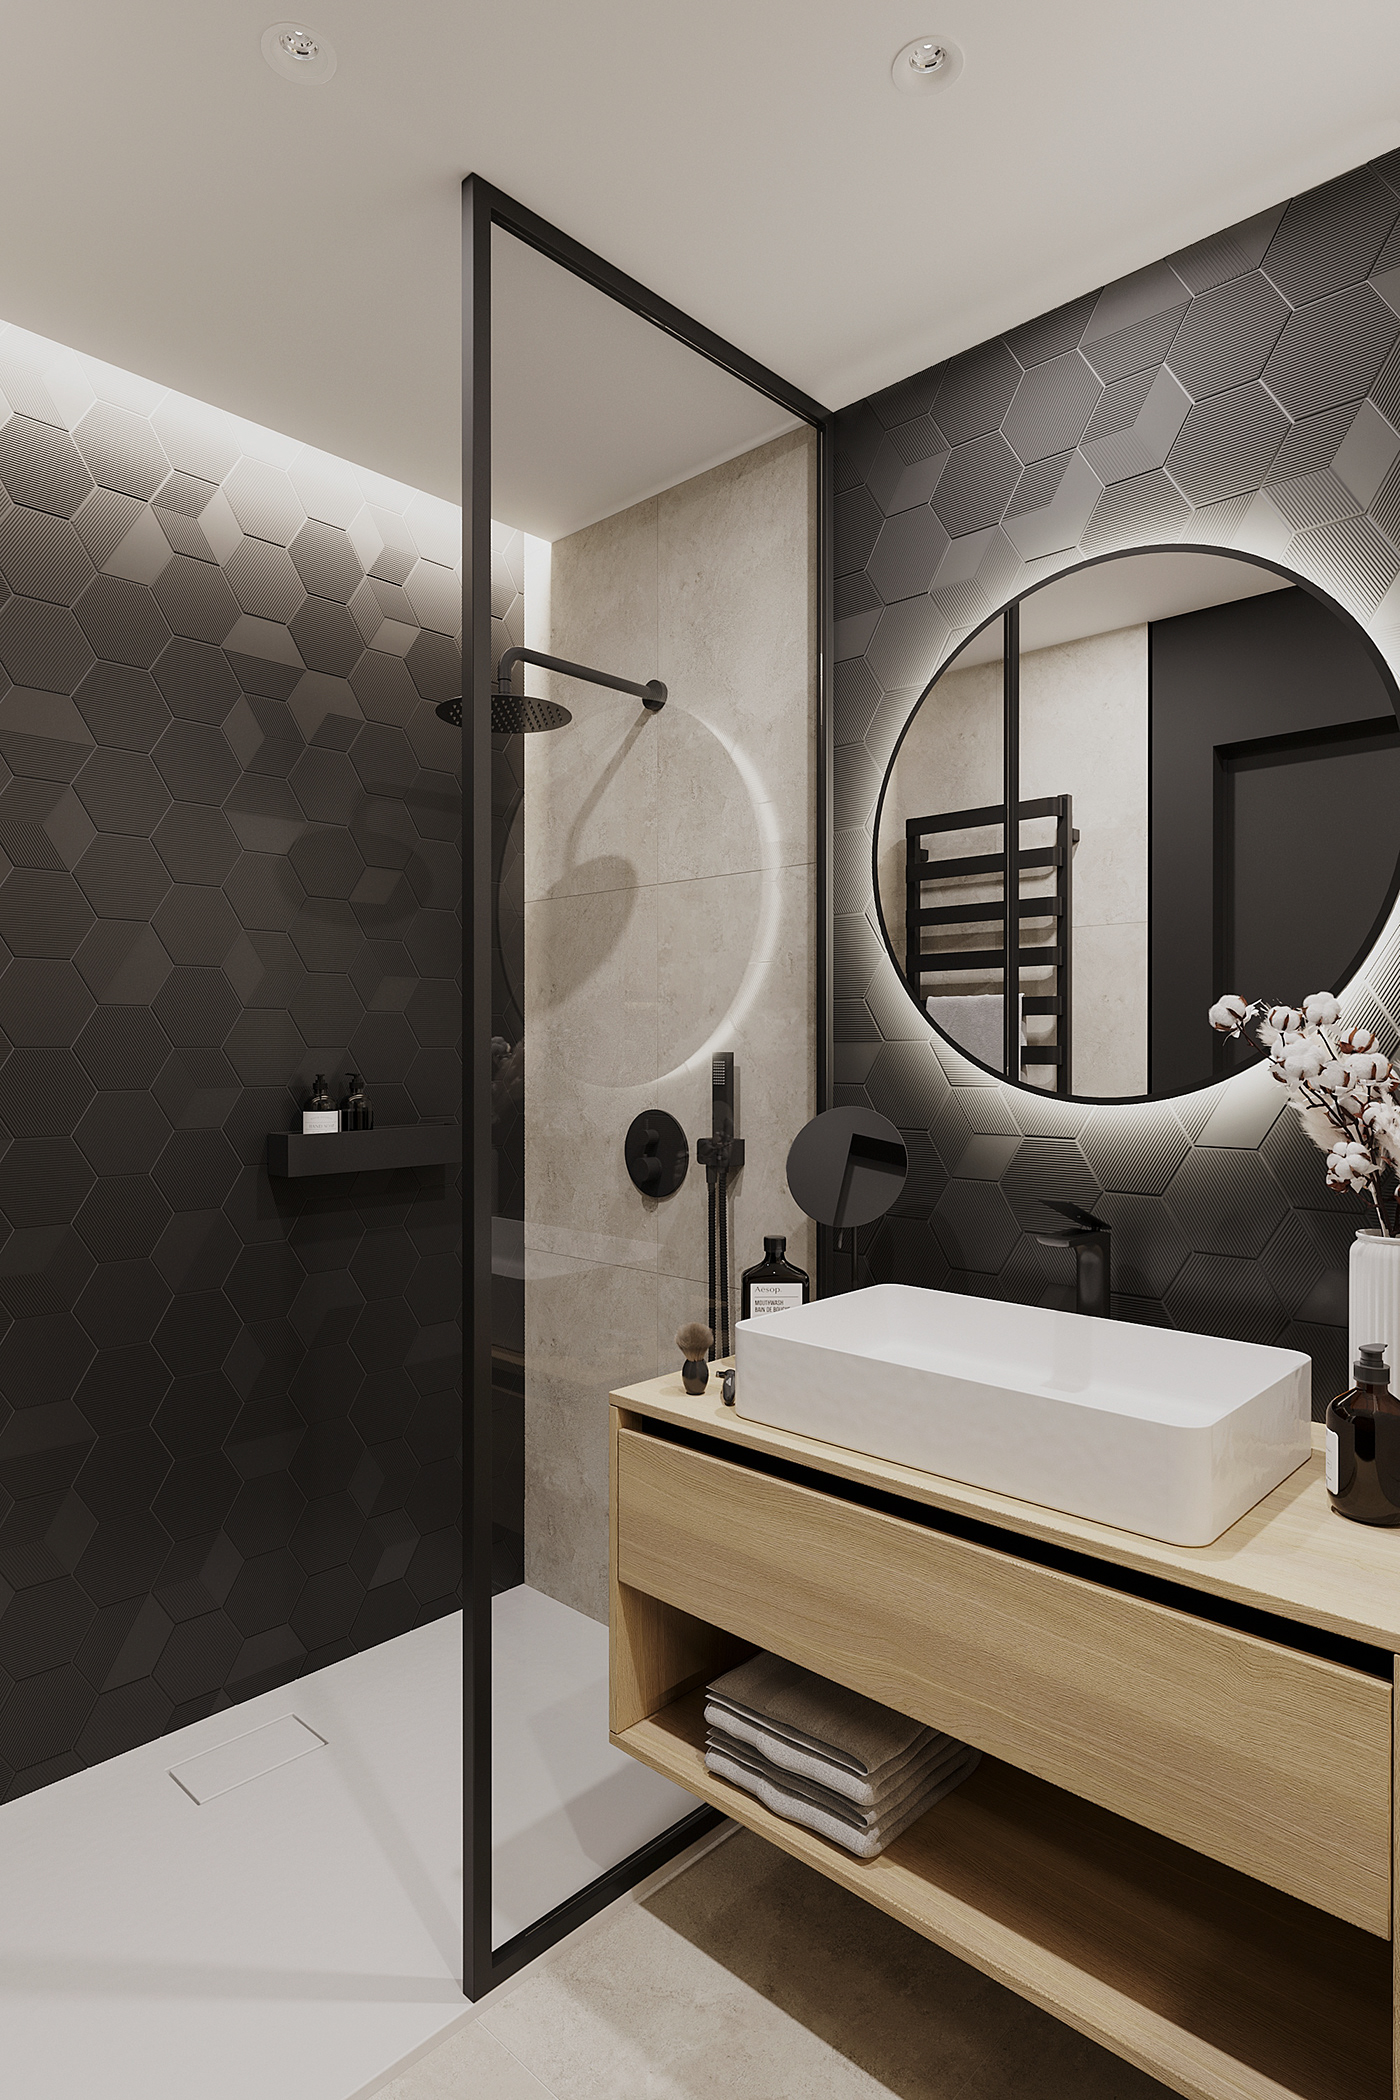 Honeycomb wall tiles are a unique highlight of this bathroom's interior, while a circular mirror softens the space by balancing the sharp lines.